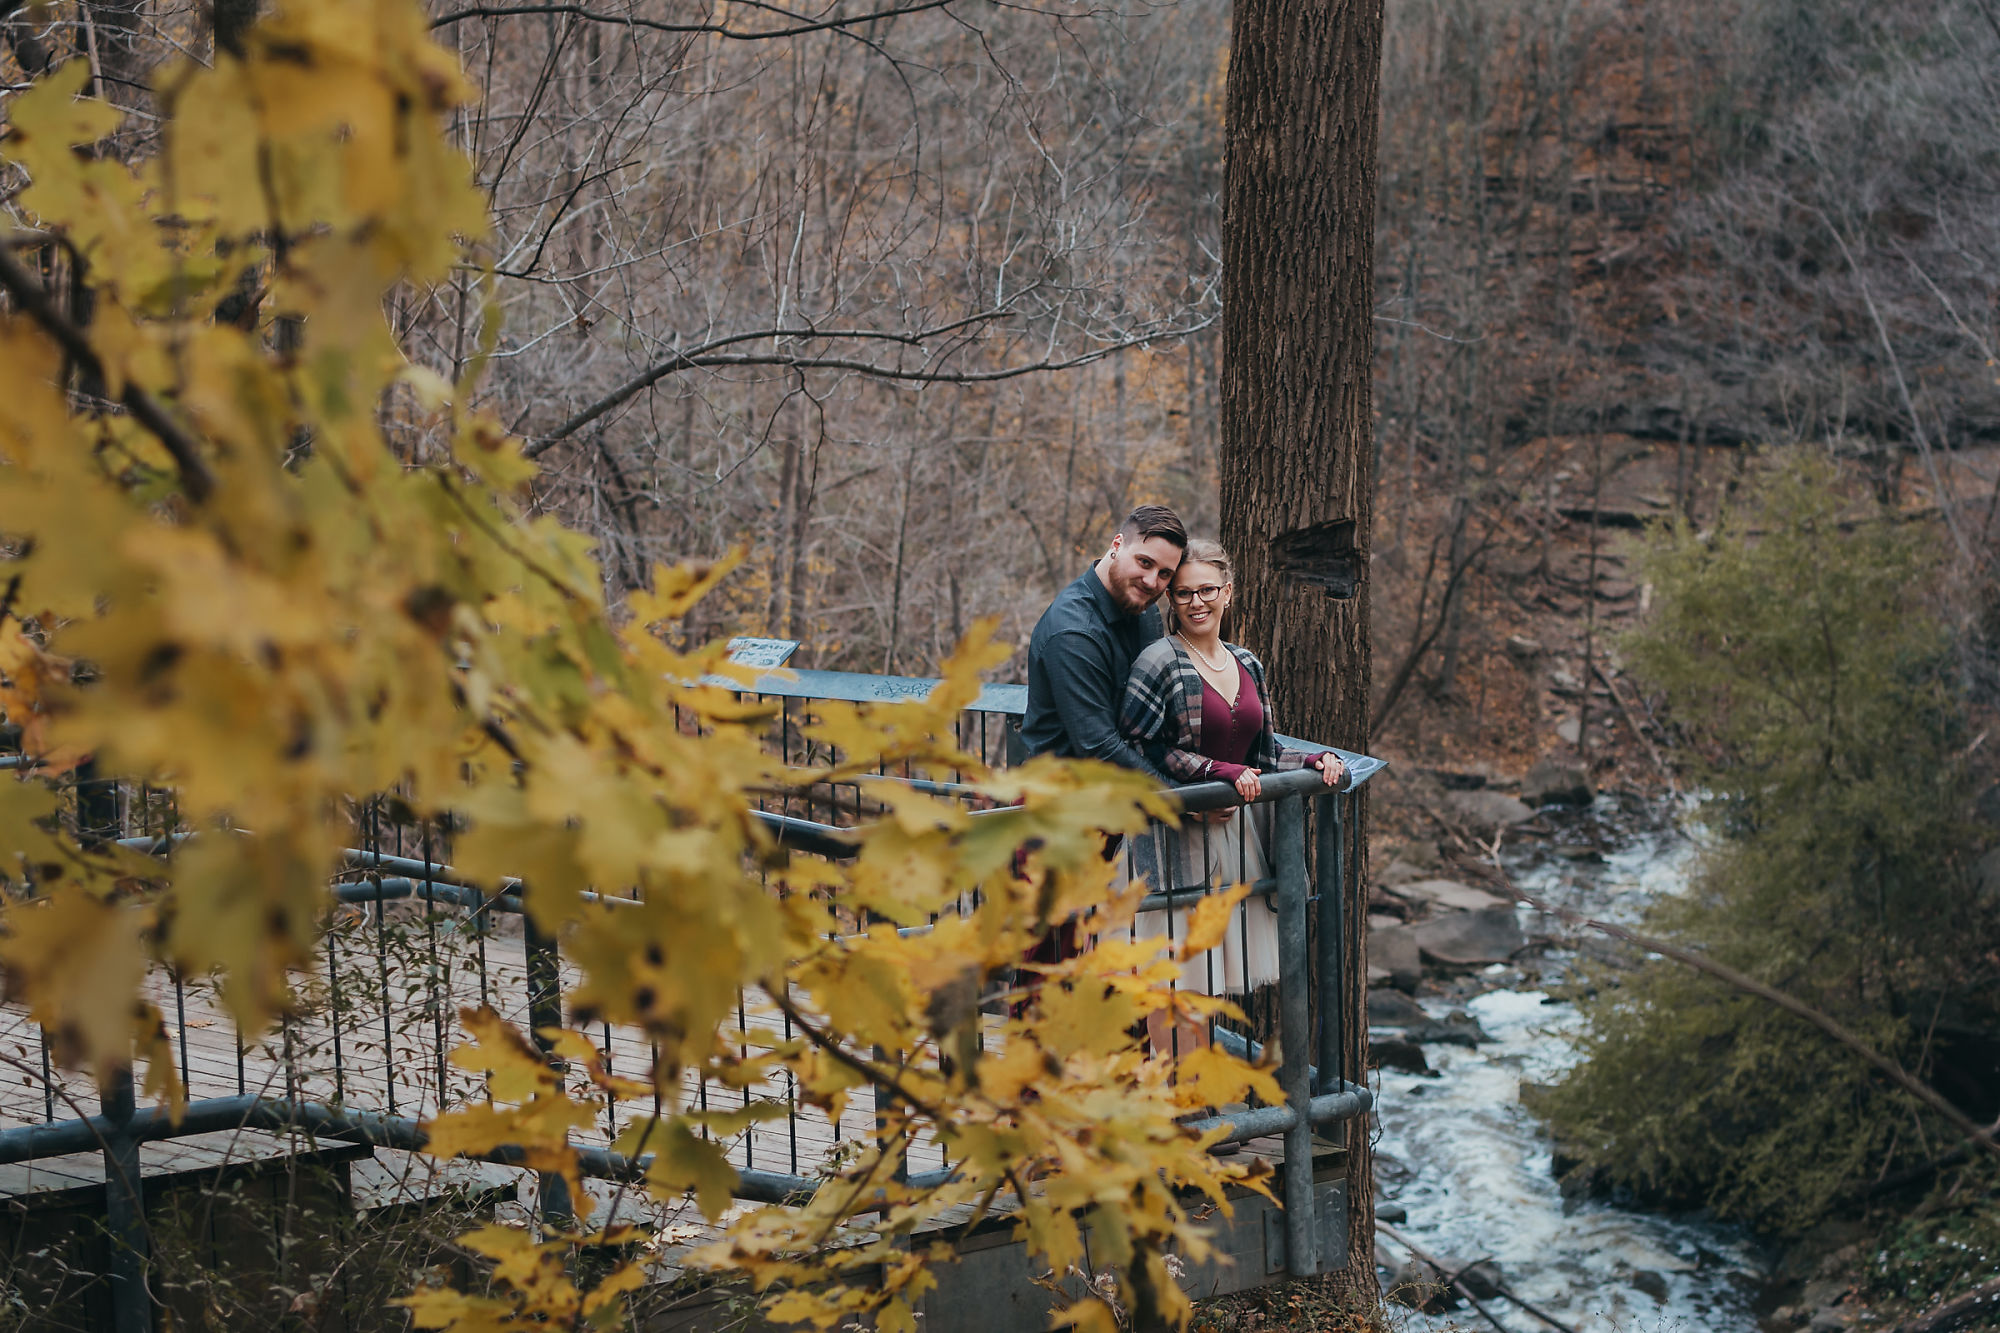 Dan and Nina pose at the lookout point by Smokey Hollow Falls during their engagement session in Dundas Ontario with photographer Jennifer Blaak.